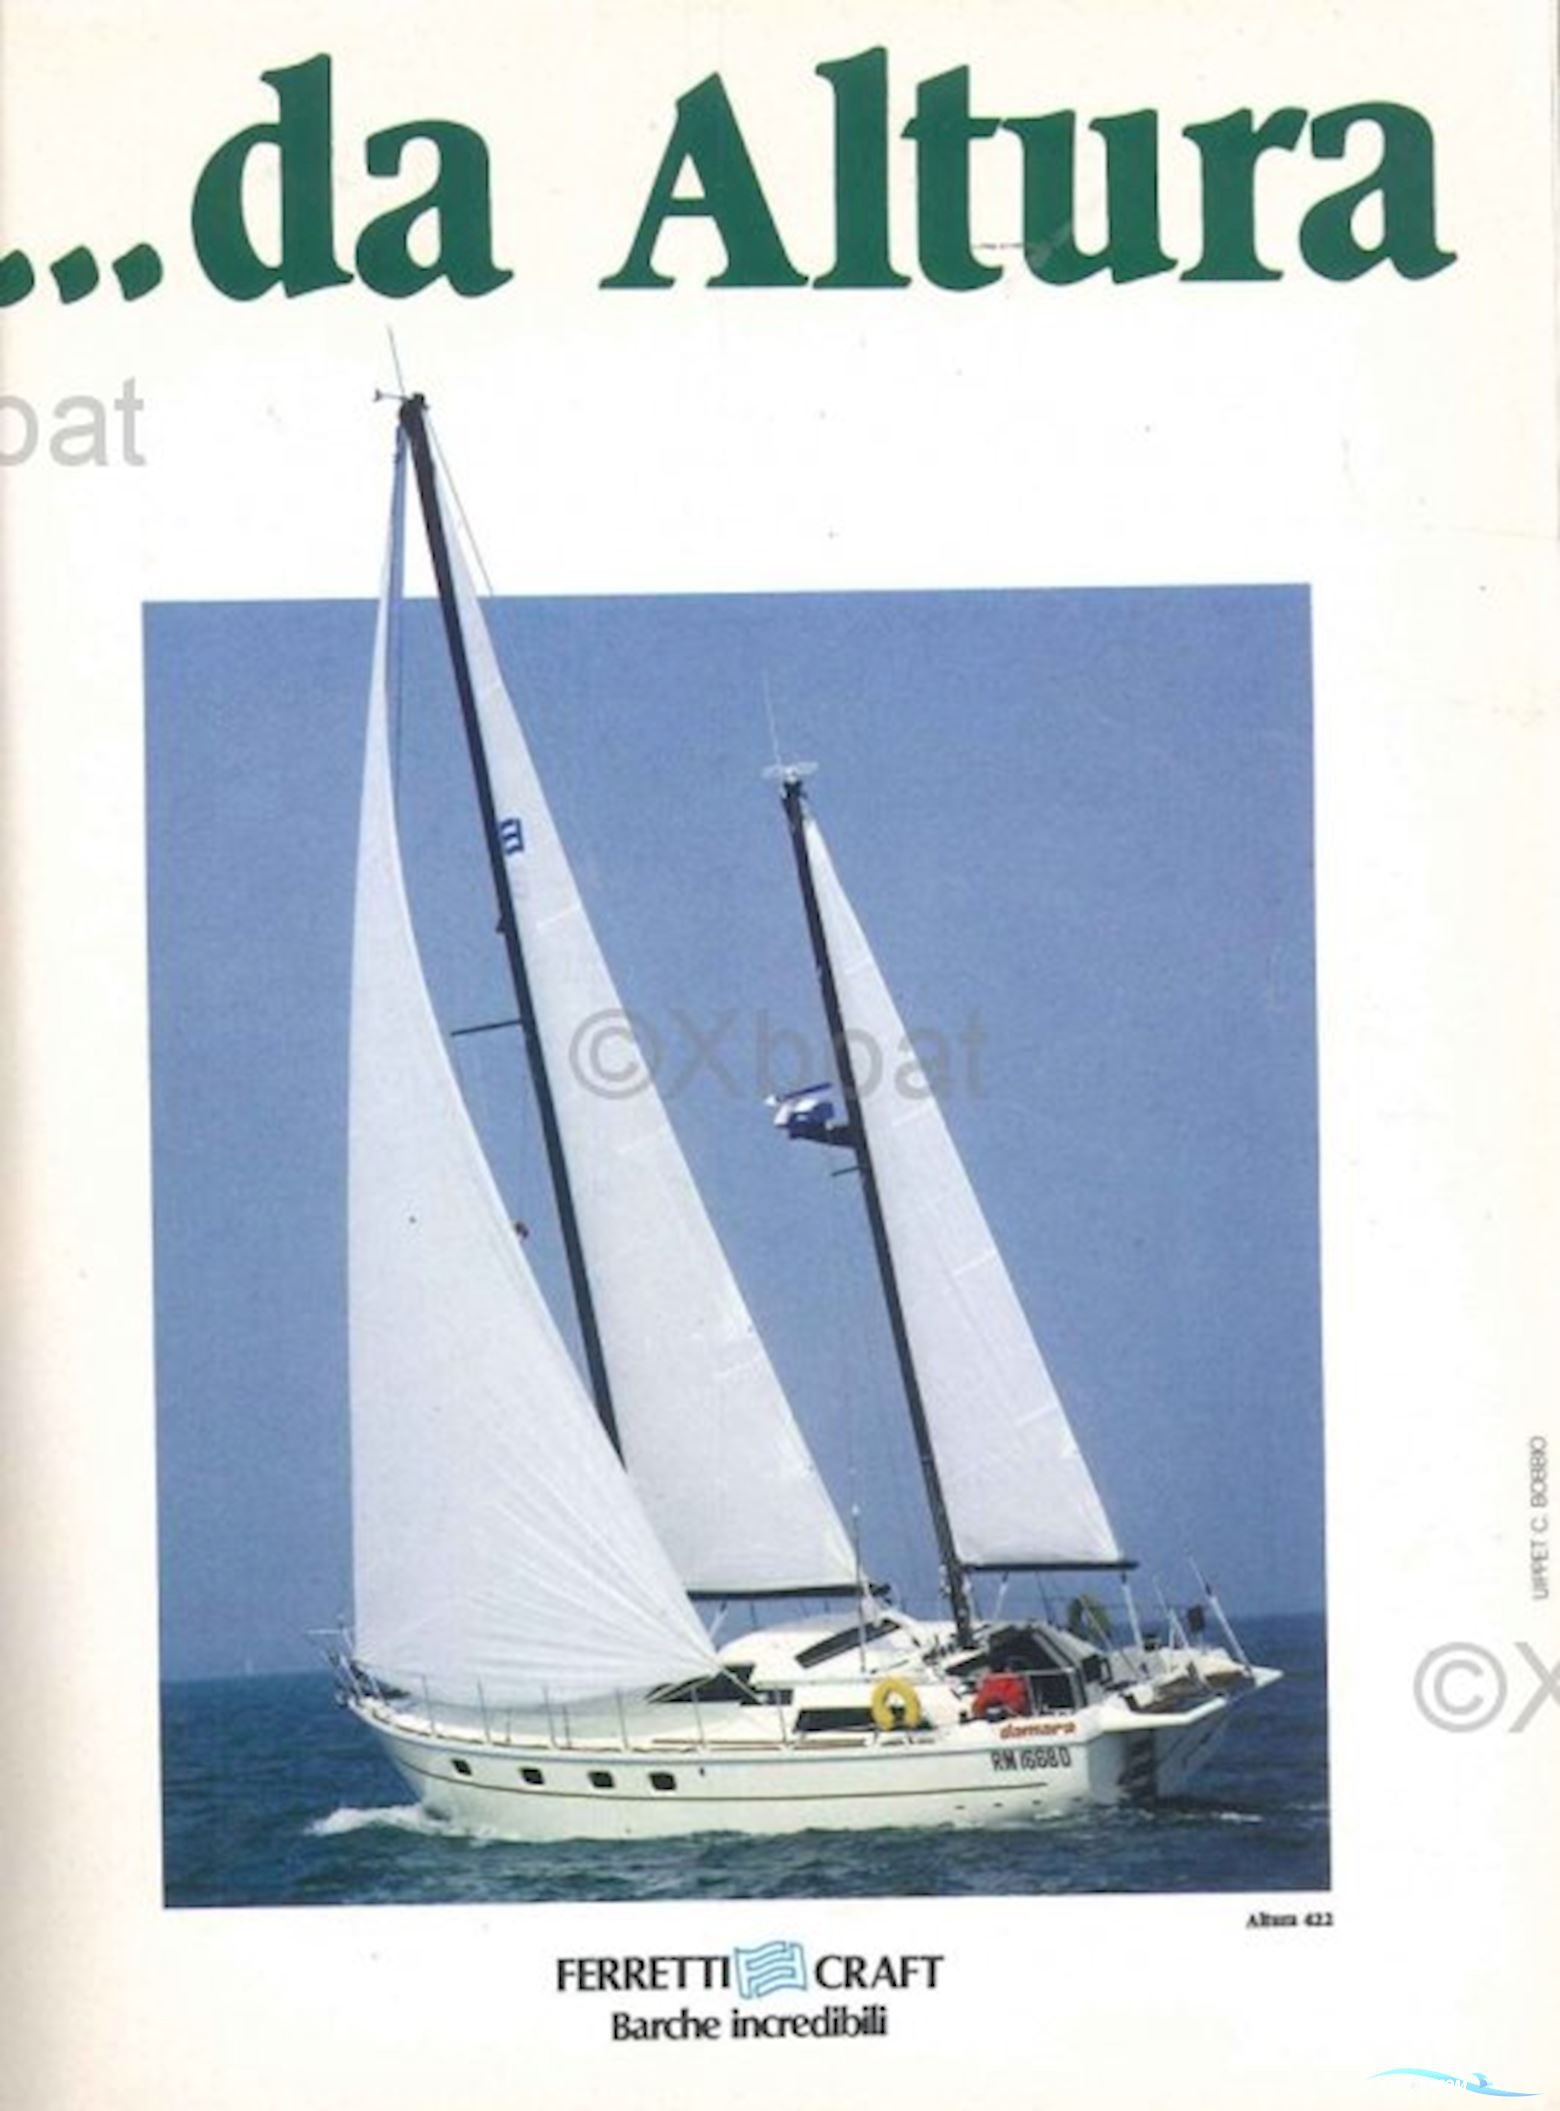 Ferretti Yachts Altura 422 Sailing boat 1981, with Mercedes engine, Italy